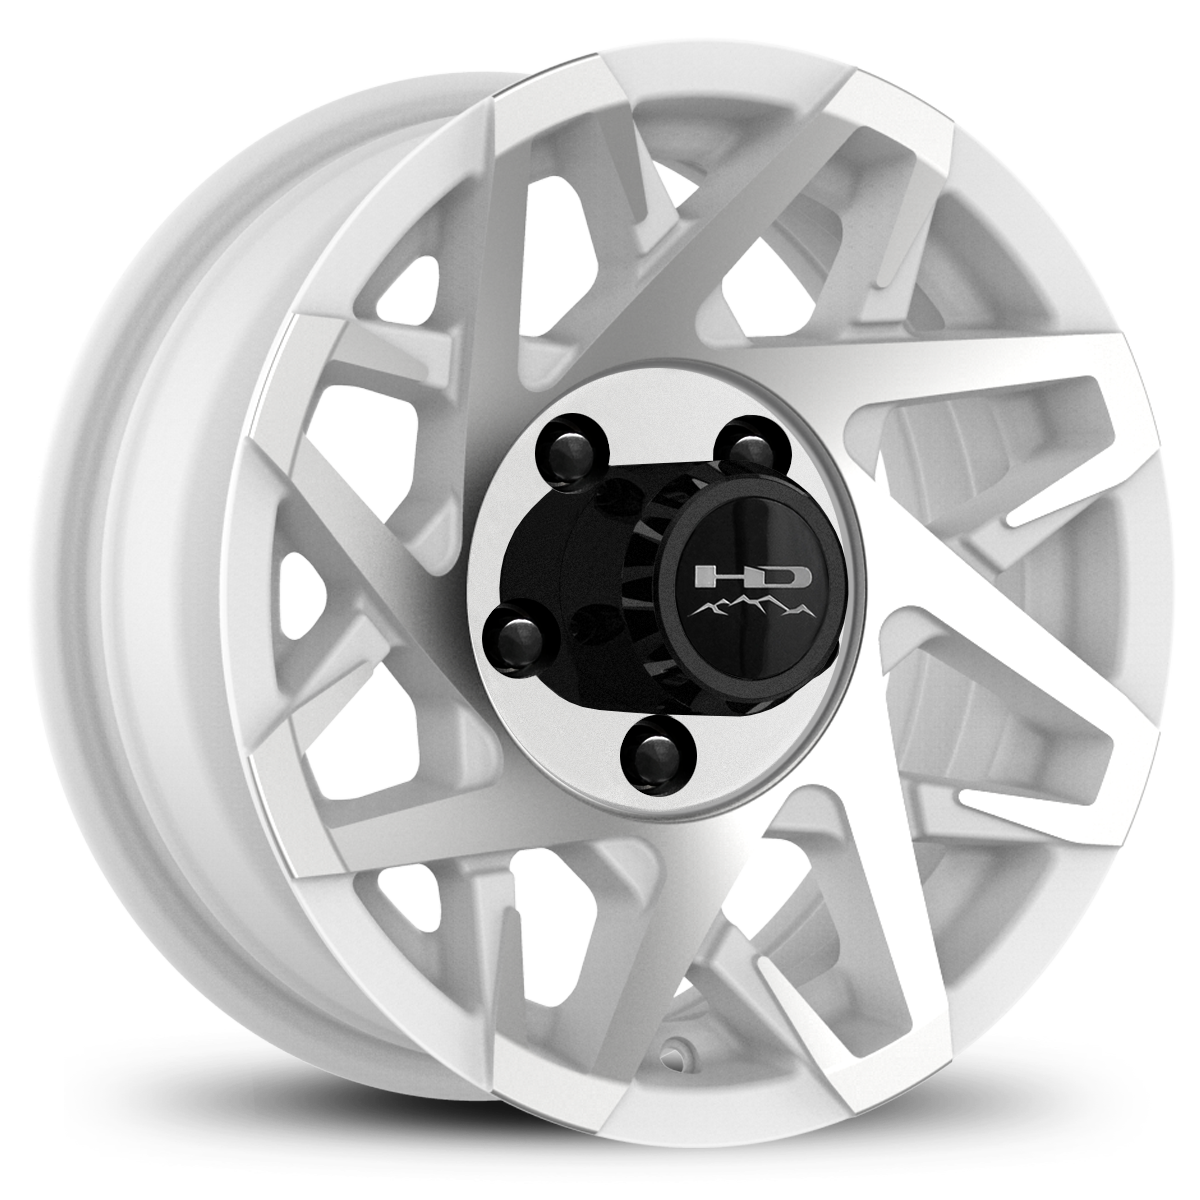 HD Off-Road Canyon Custom Trailer Wheel Rims in 15x6.0  15x6 Gloss White Machined Face with Center Cap & Logo fits 5x4.50 / 5x114.3 Axle Boat, Car, RV, Travel, Concession, Horse, Utility, Lawn & Garden, & Landscaping.